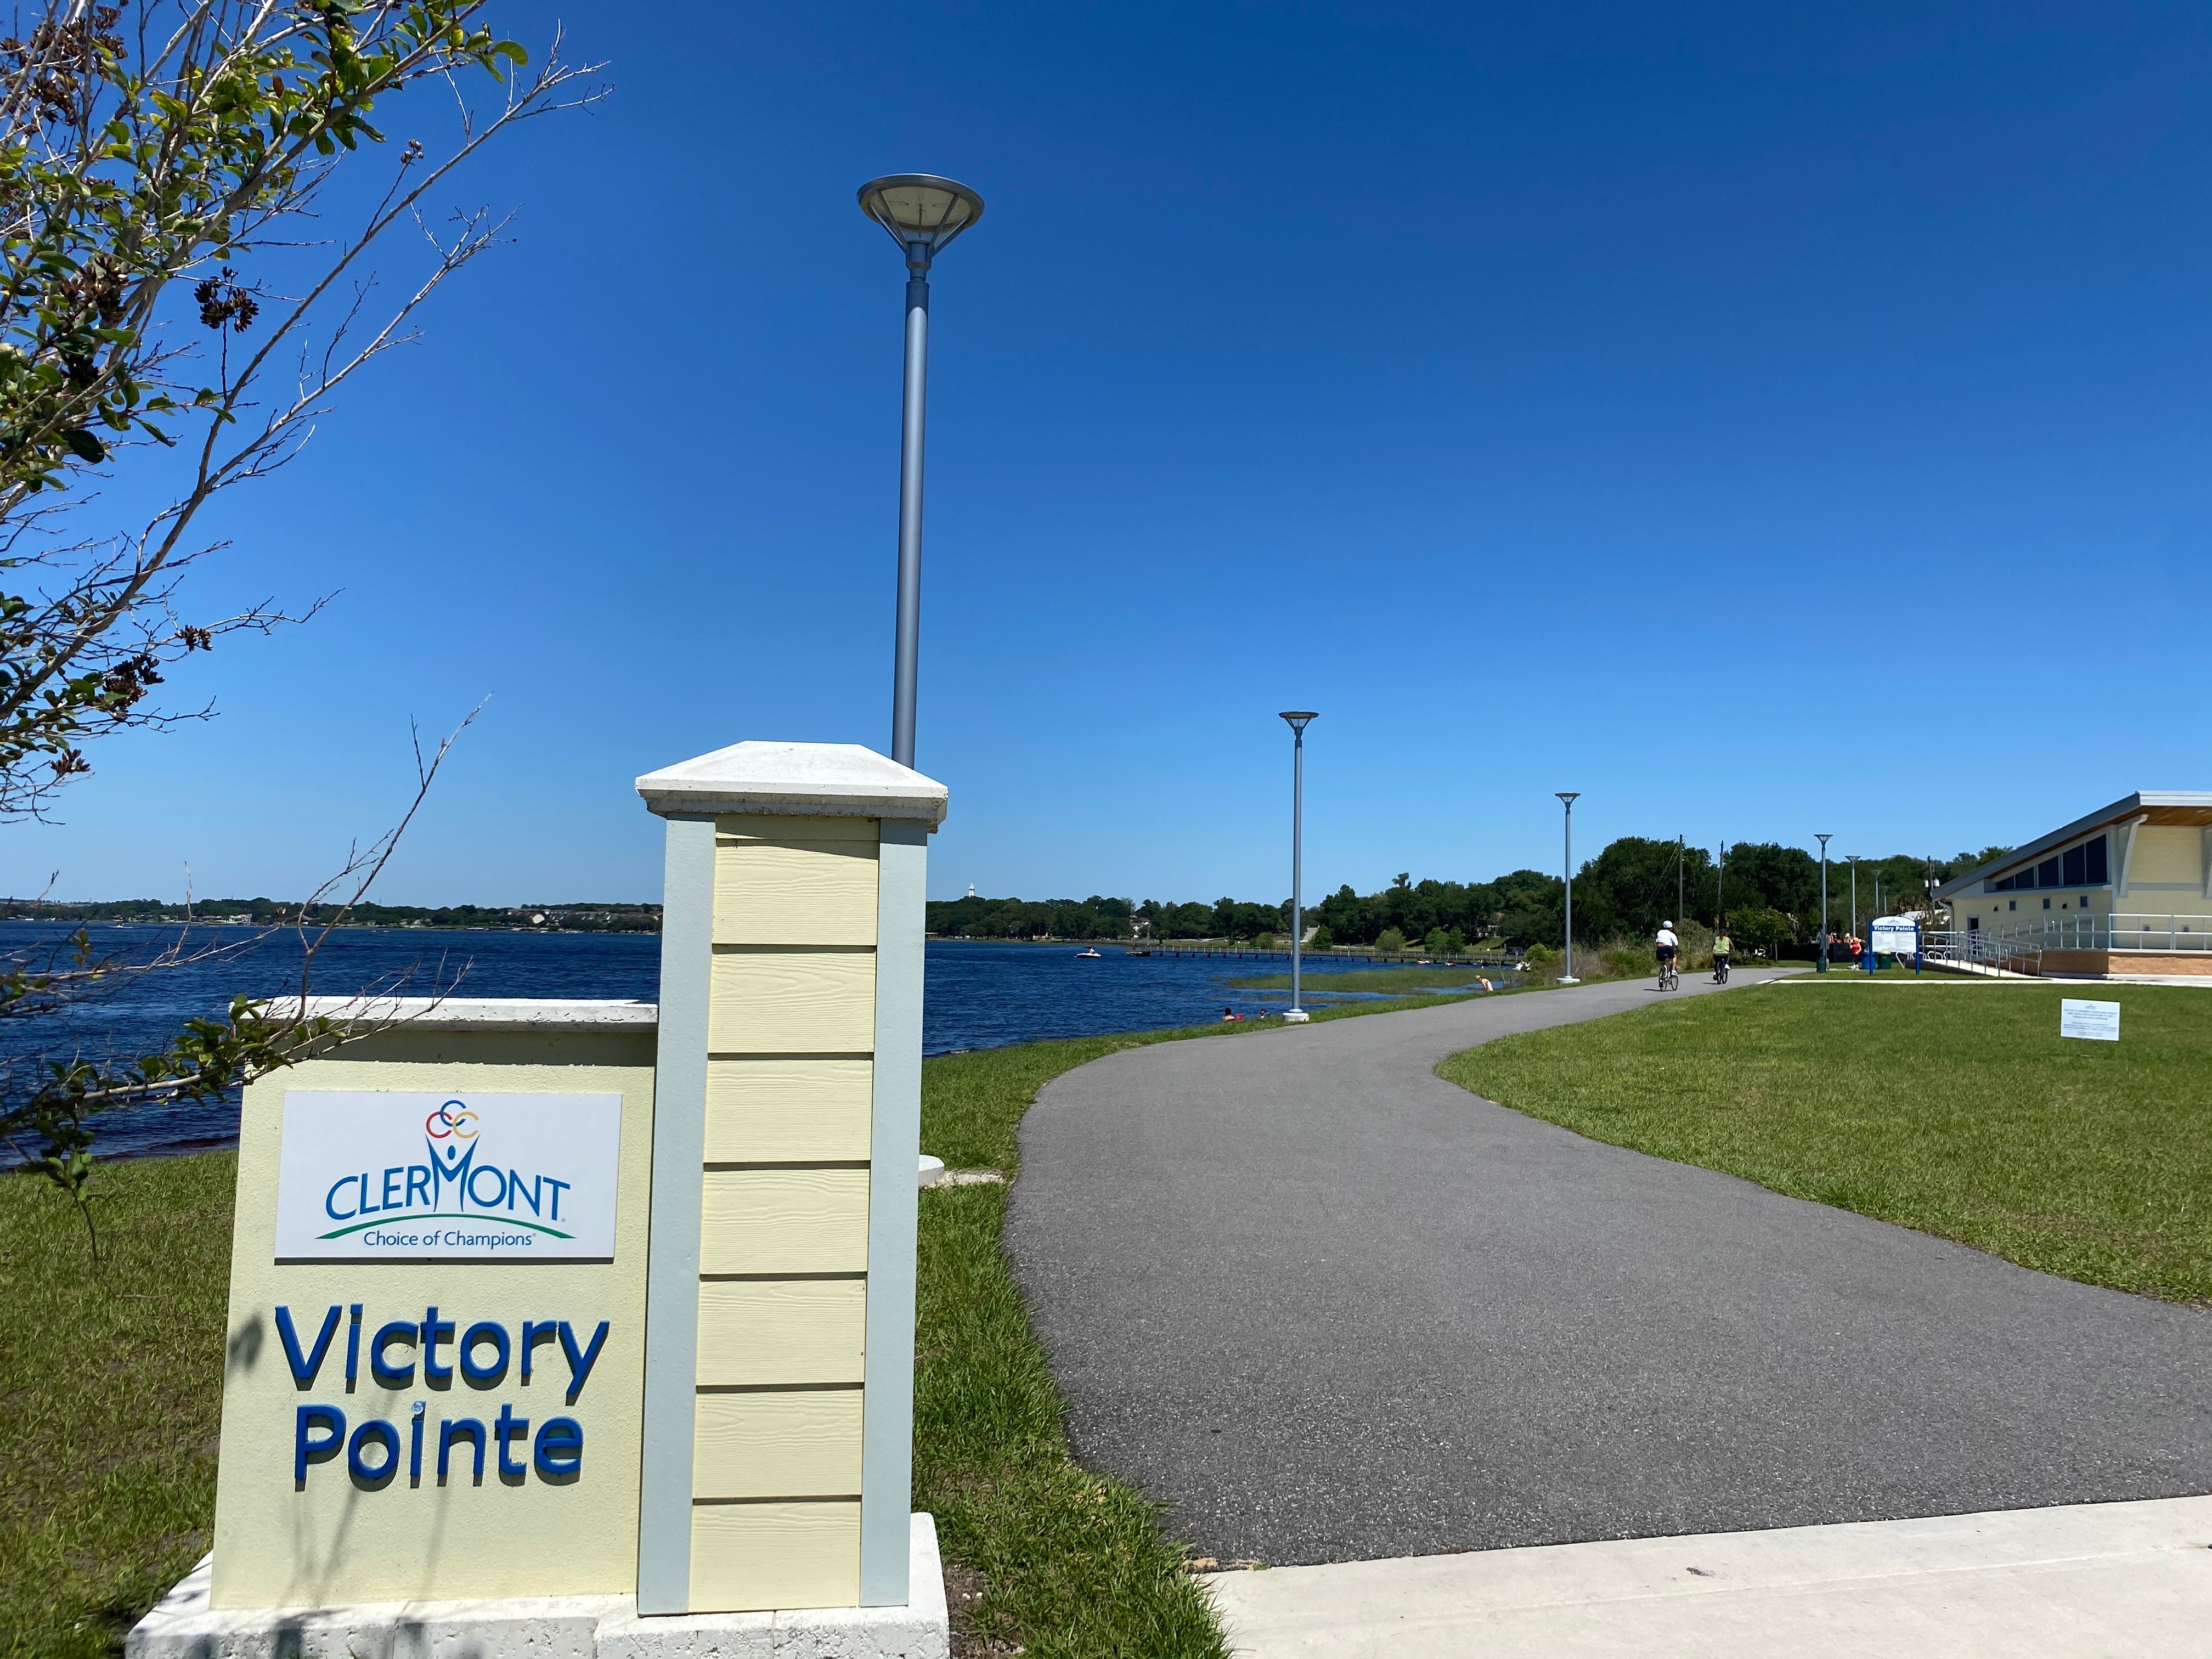 victory pointe clermont florida